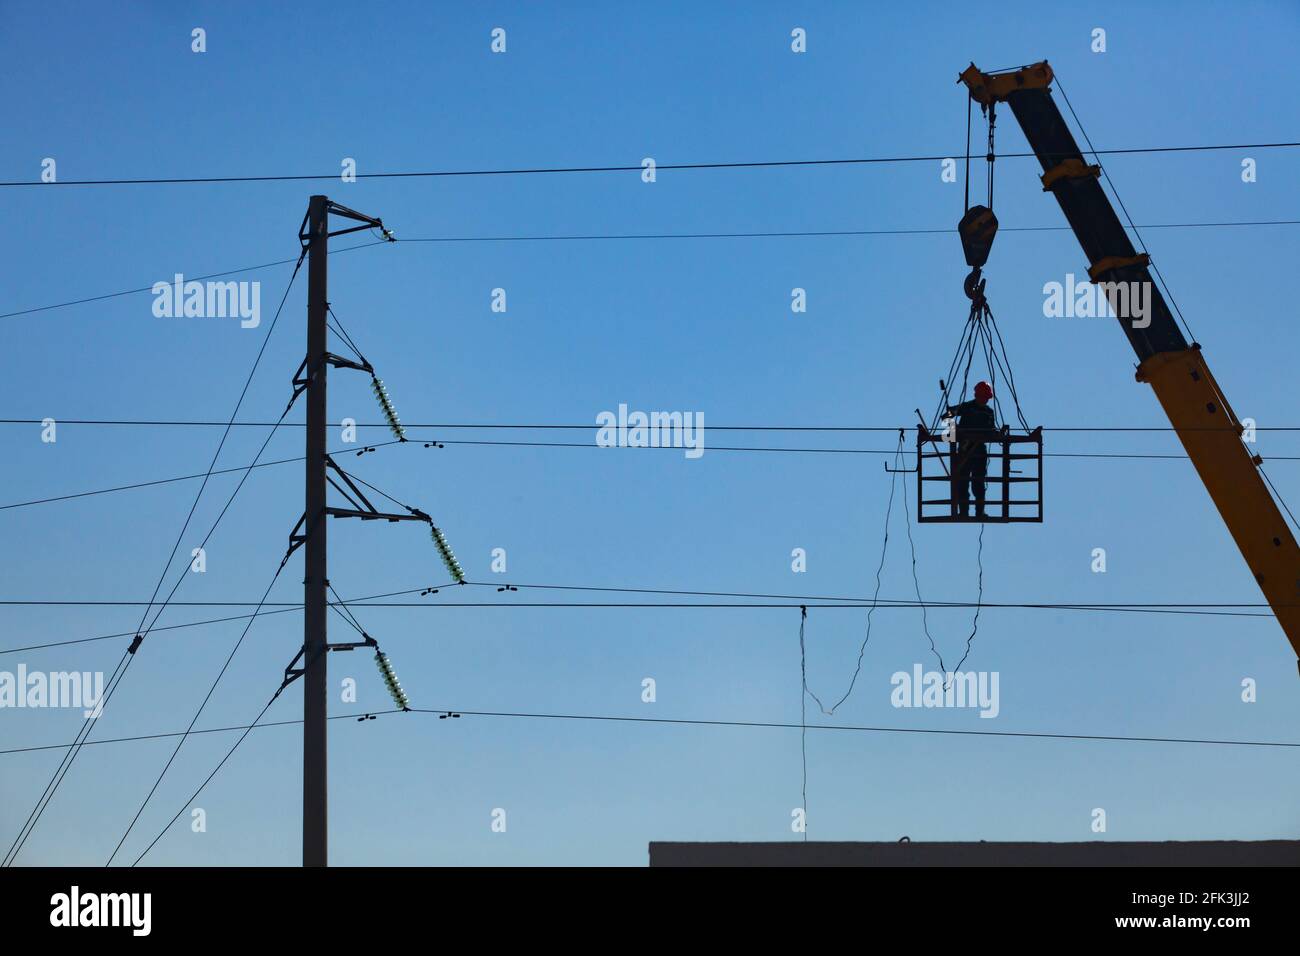 Silhouette of worker on the crane cradle. Repairing electric power line. Blue sky background. Stock Photo